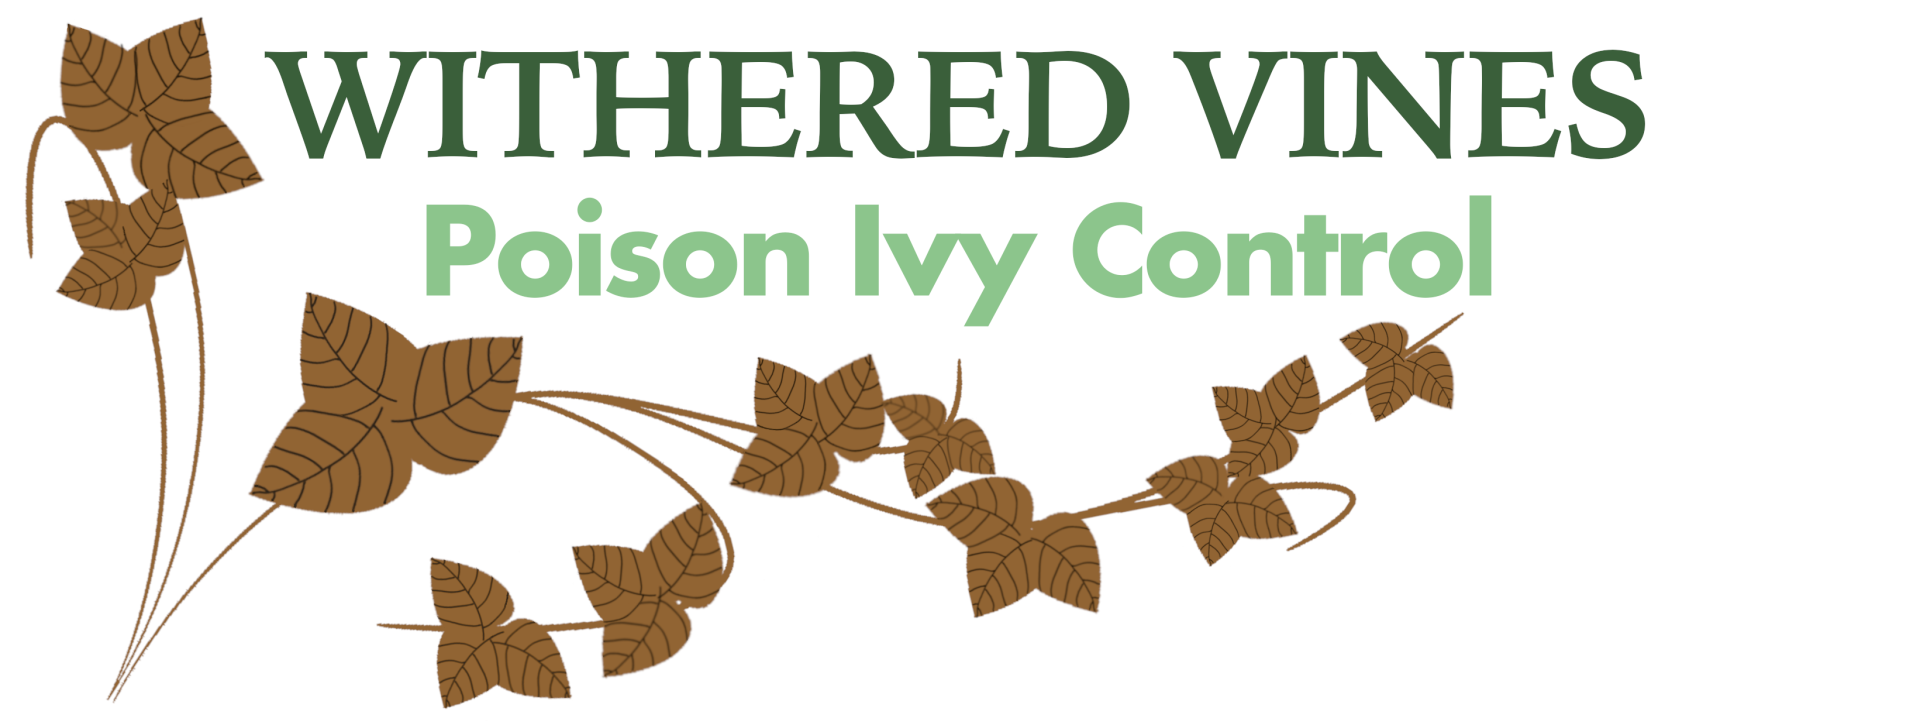 Withered Vines